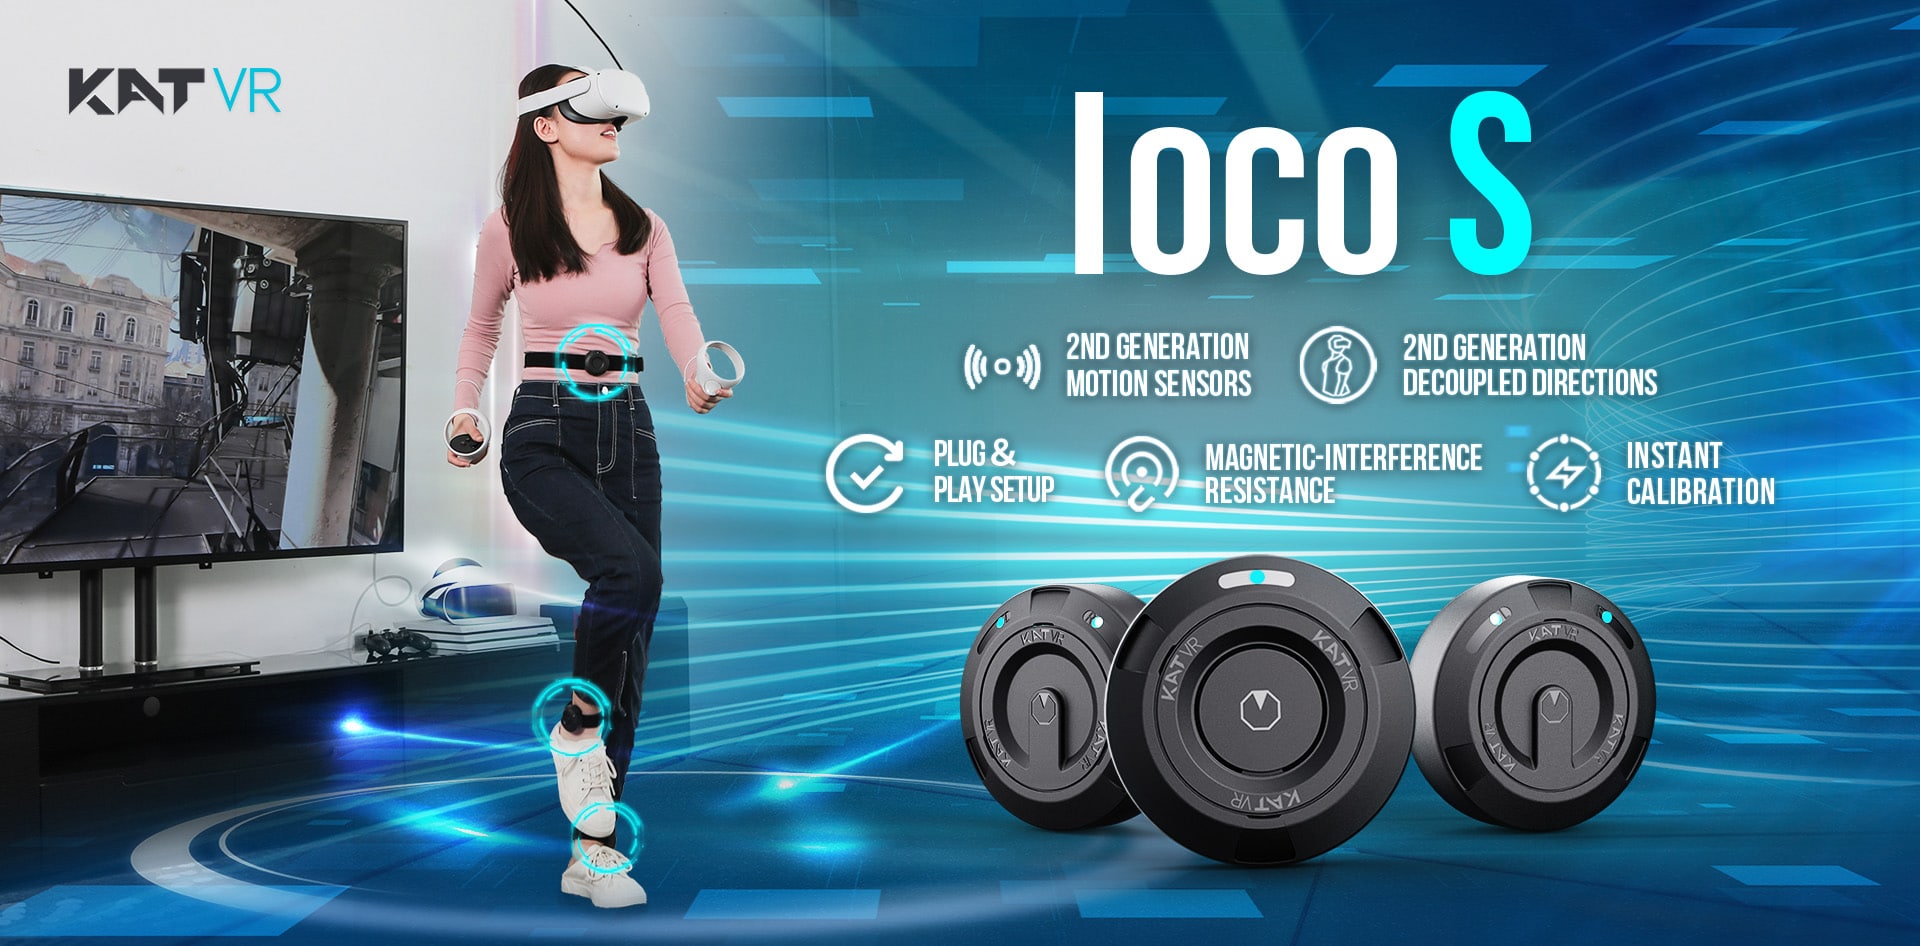 Kat VR Updates Wearable Locomotion System With KAT Loco S